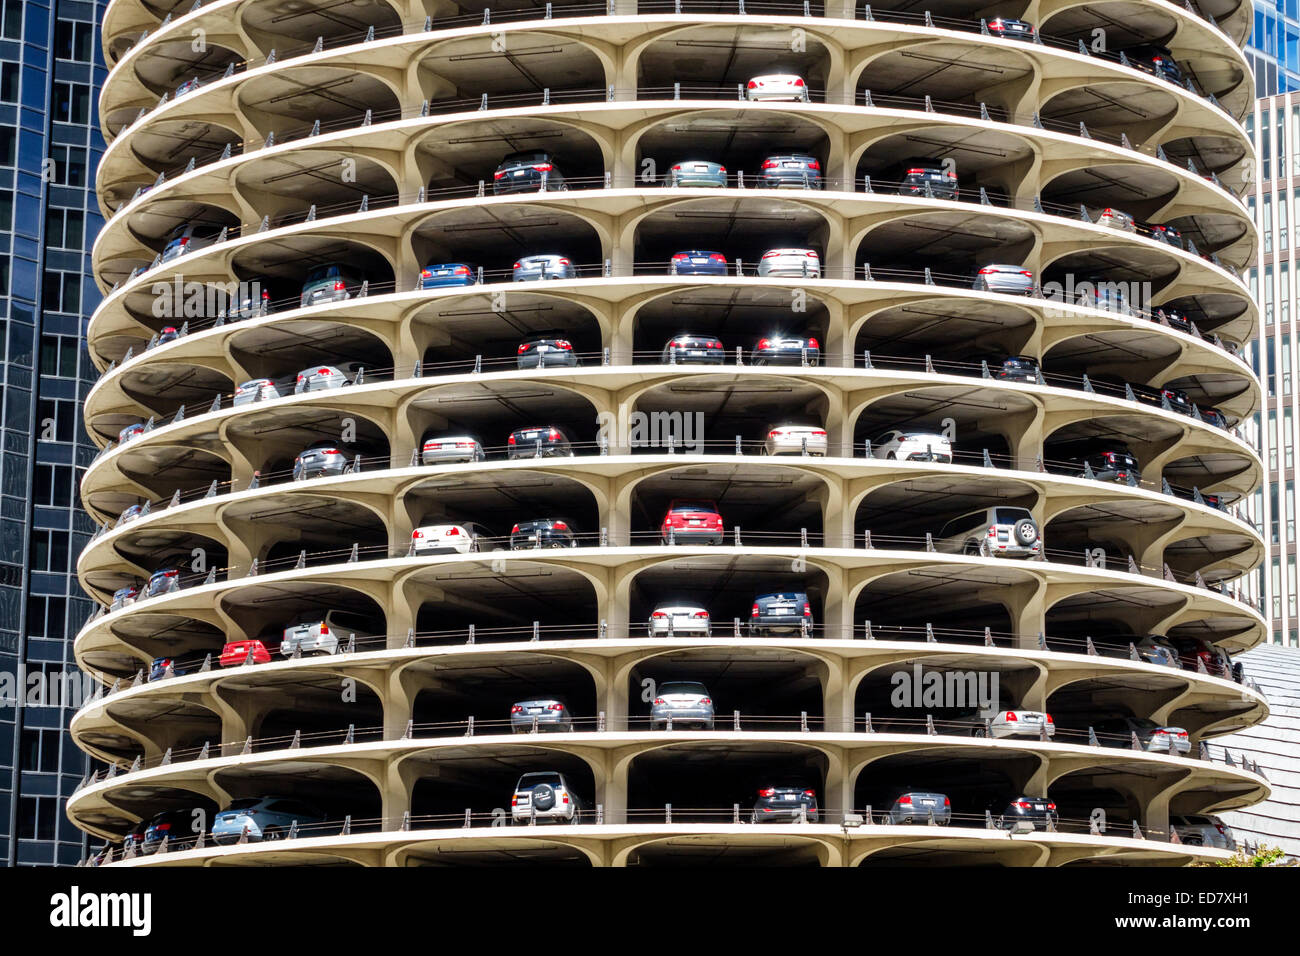 Chicago Illinois,River North,downtown,Marina City,high rise,residential,building,condominiums,parking garage,multi-level,covered,IL140906018 Stock Photo